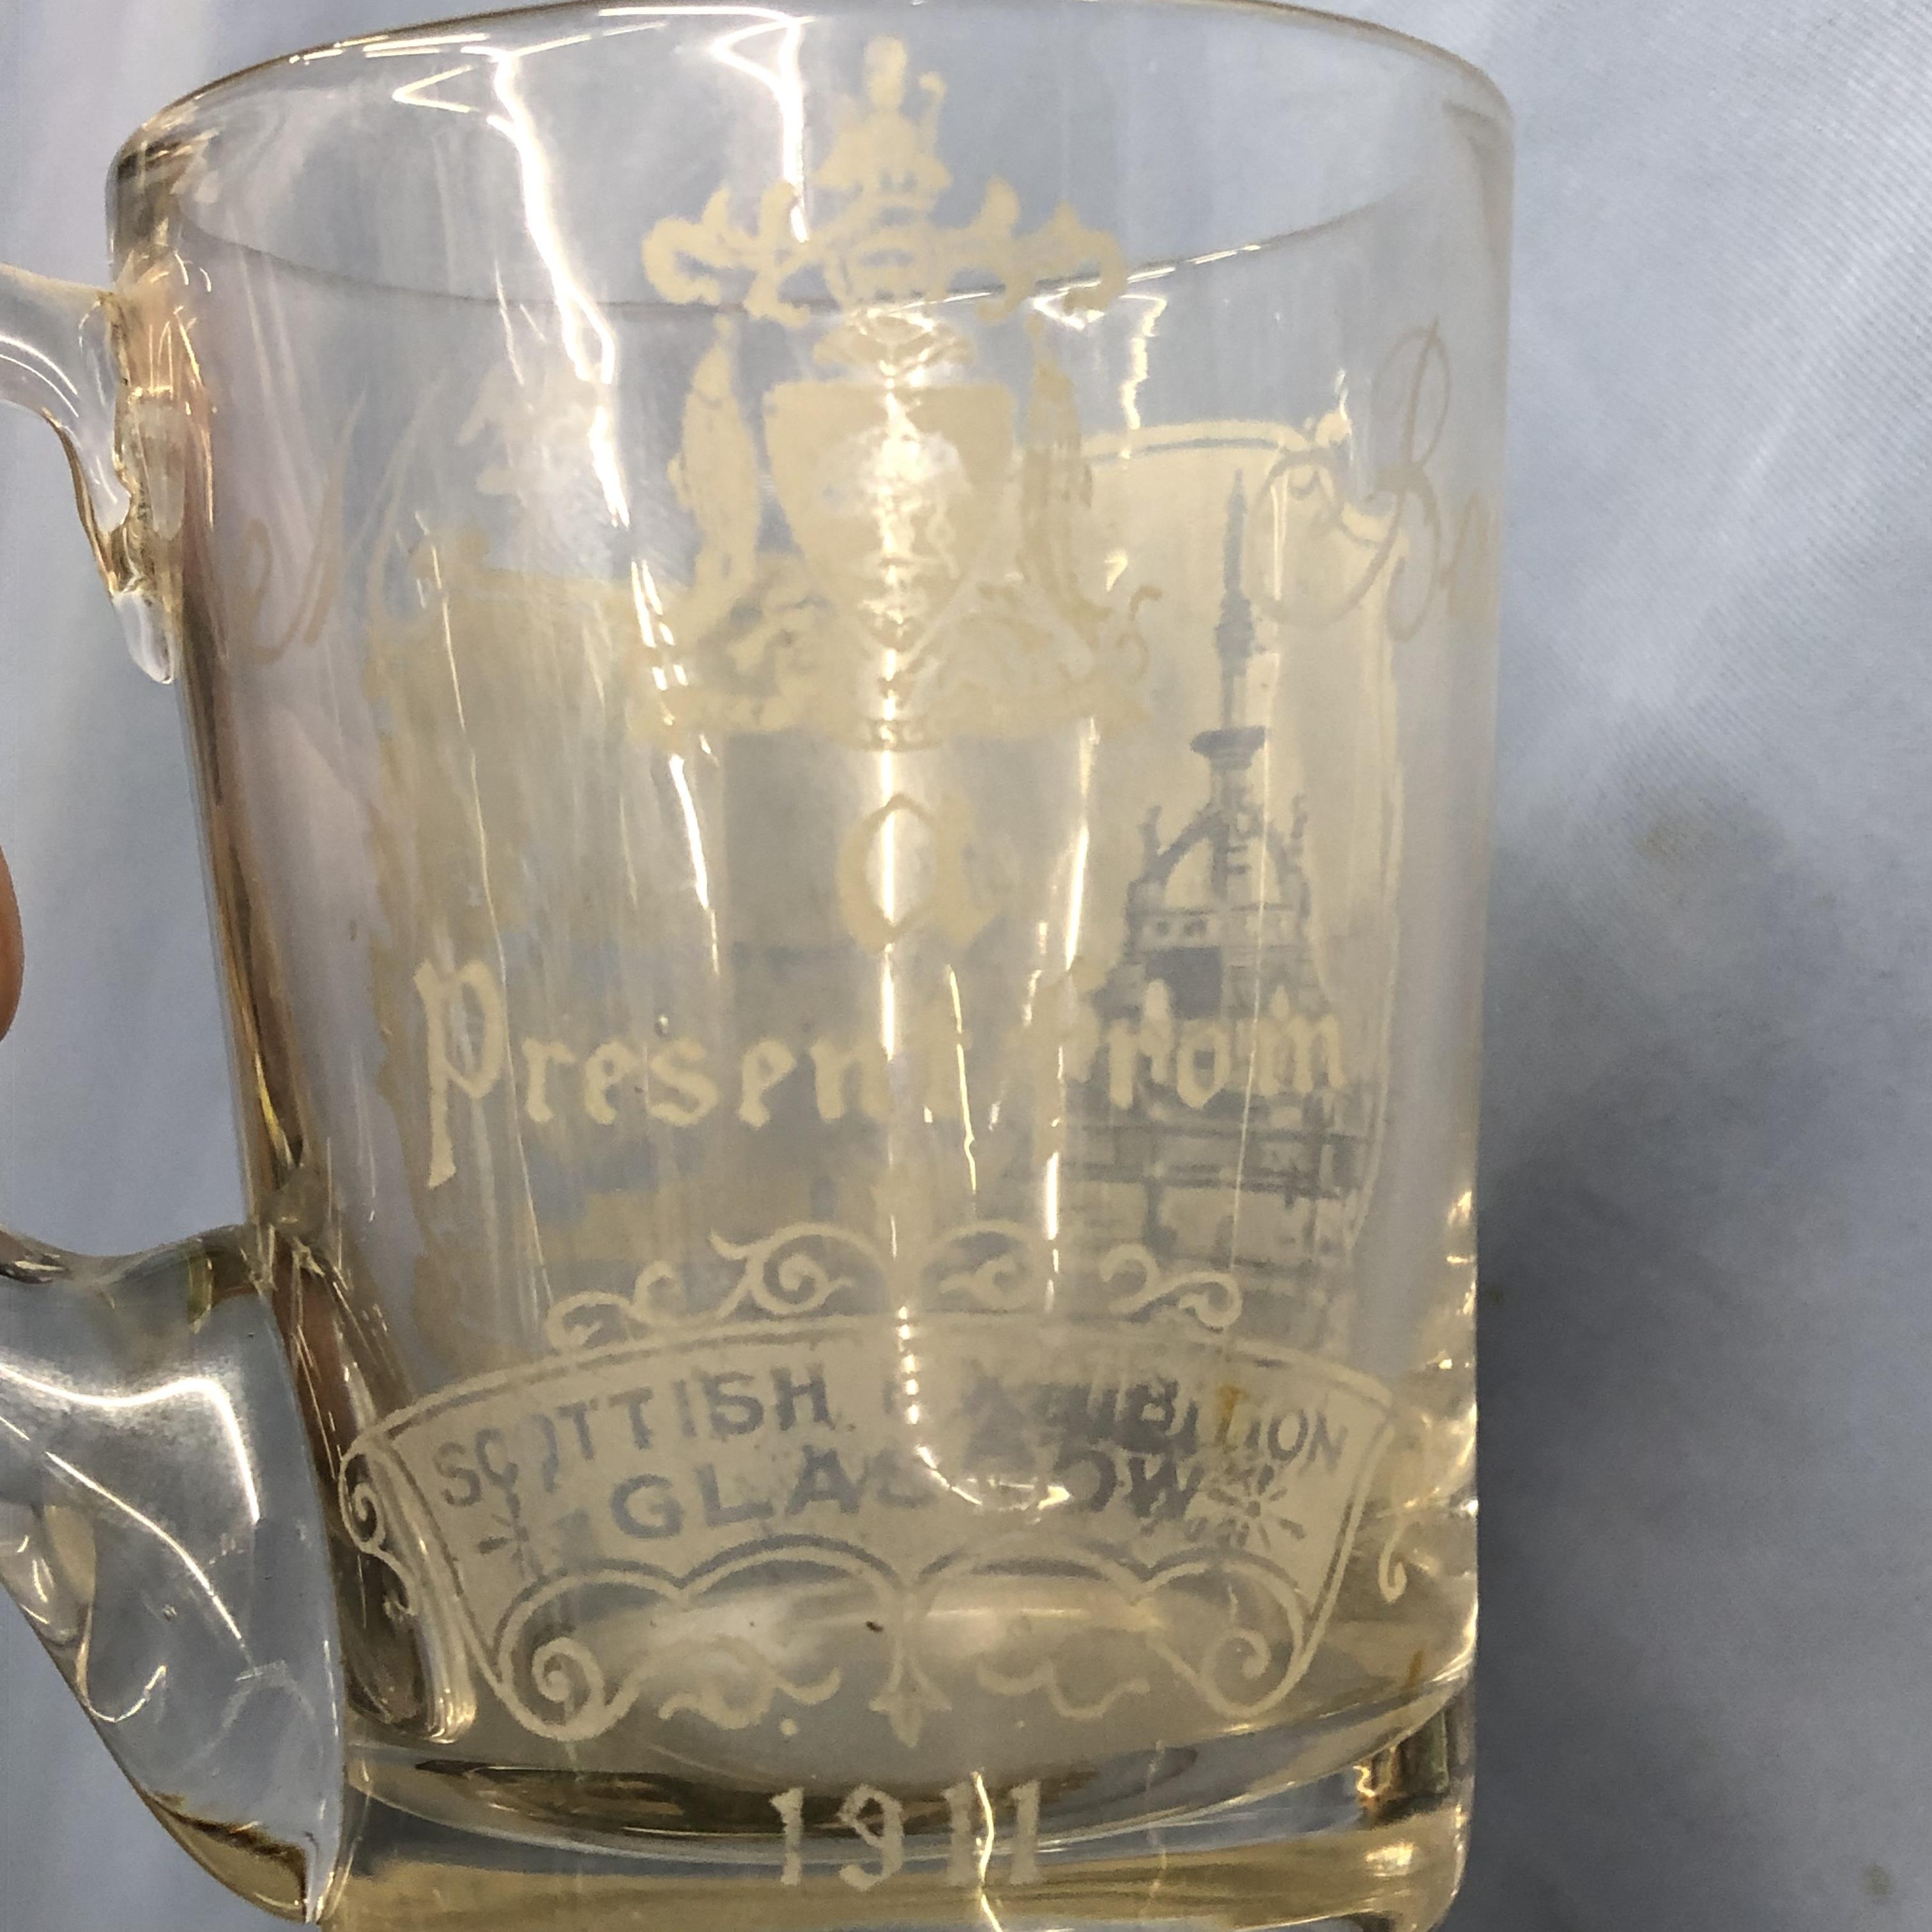 ETCHED MINIATURE GLASS TANKARD, PRESENT FROM THE SCOTTISH EXHIBITION GLASGOW 1911 9. - Image 3 of 4